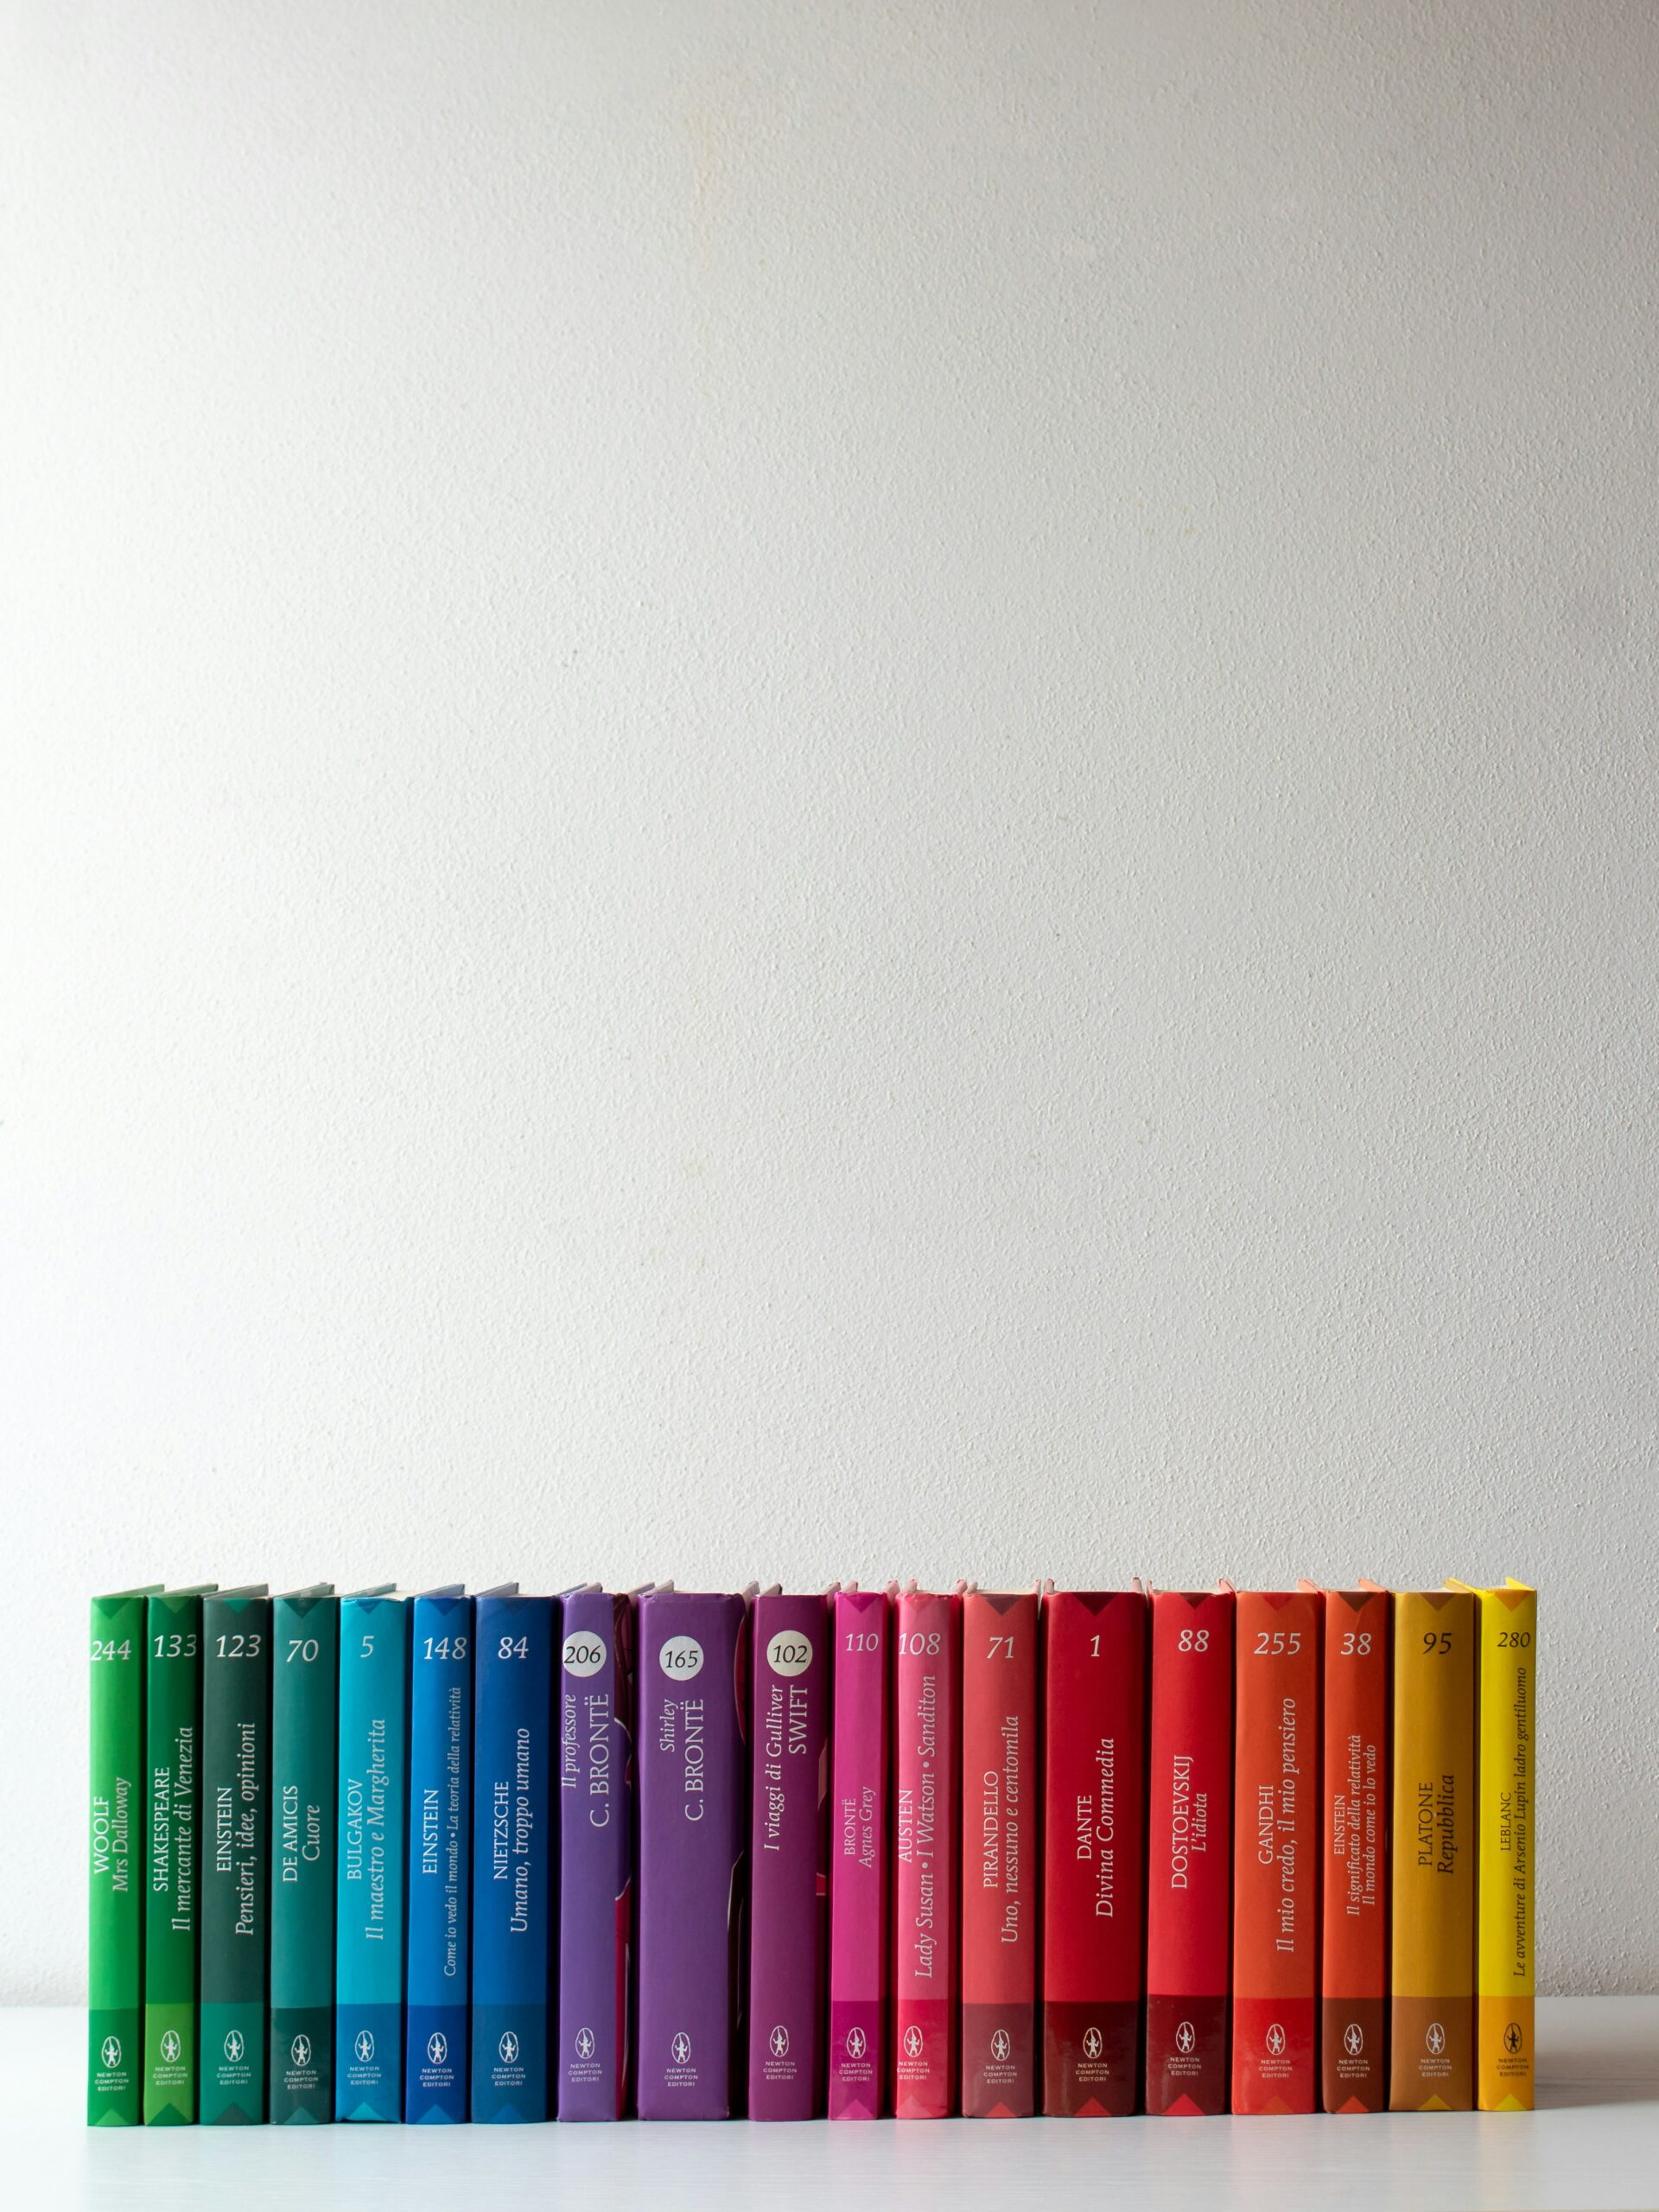 Row of books in the colour theme of a rainbow, starting from the left with green, into blue, purply, pink, red, orange and finishing with yellow